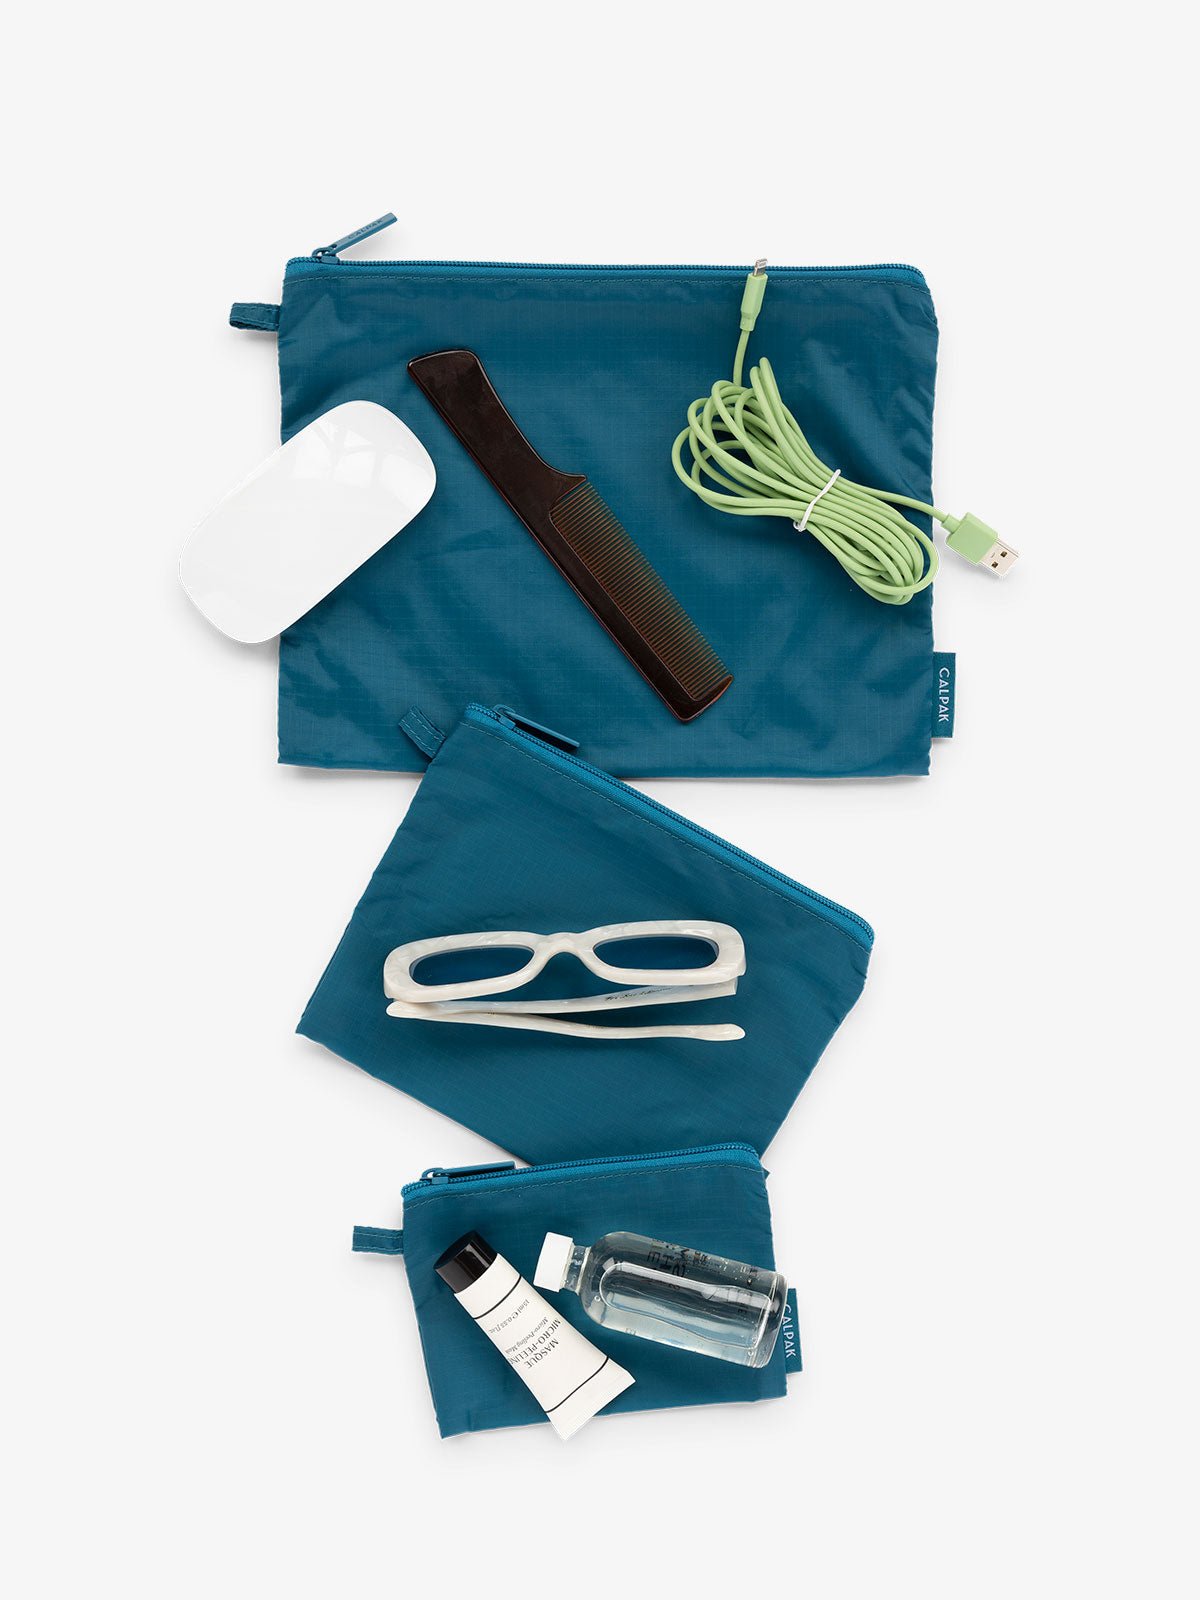 CALPAK Compakt 3 piece zippered pouch set in 3 sizes with water resistant material in lagoon blue